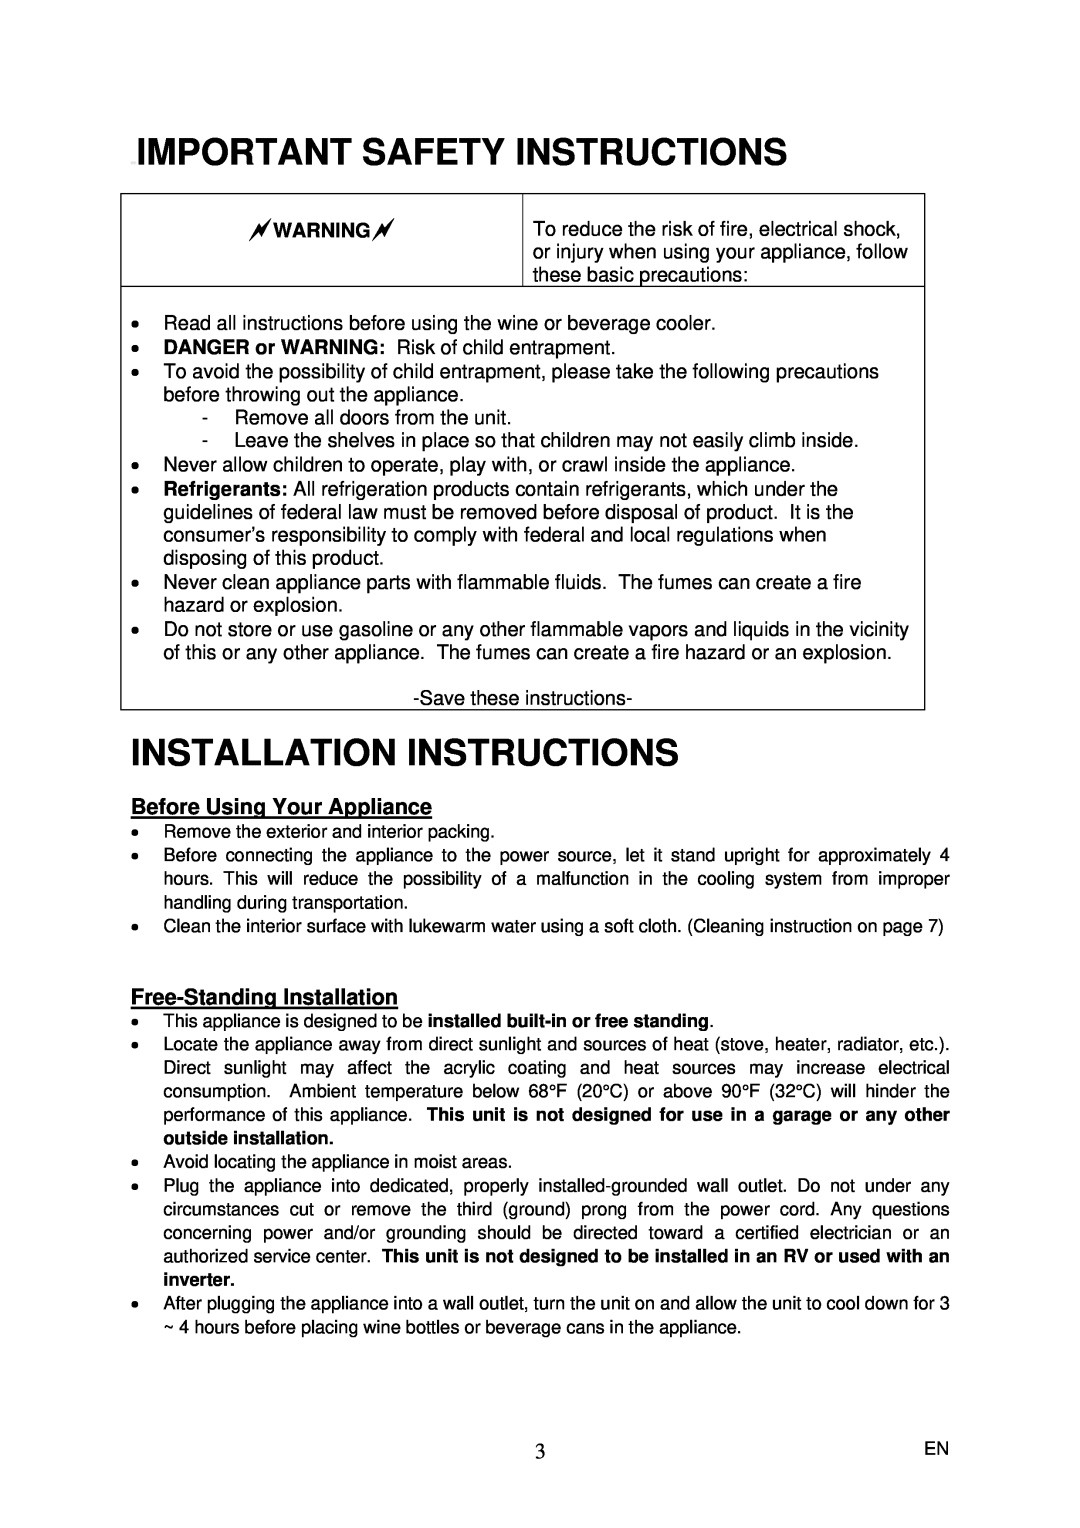 Magic Chef MCWBC77DZC Important Safety Instructions, Installation Instructions, Before Using Your Appliance 